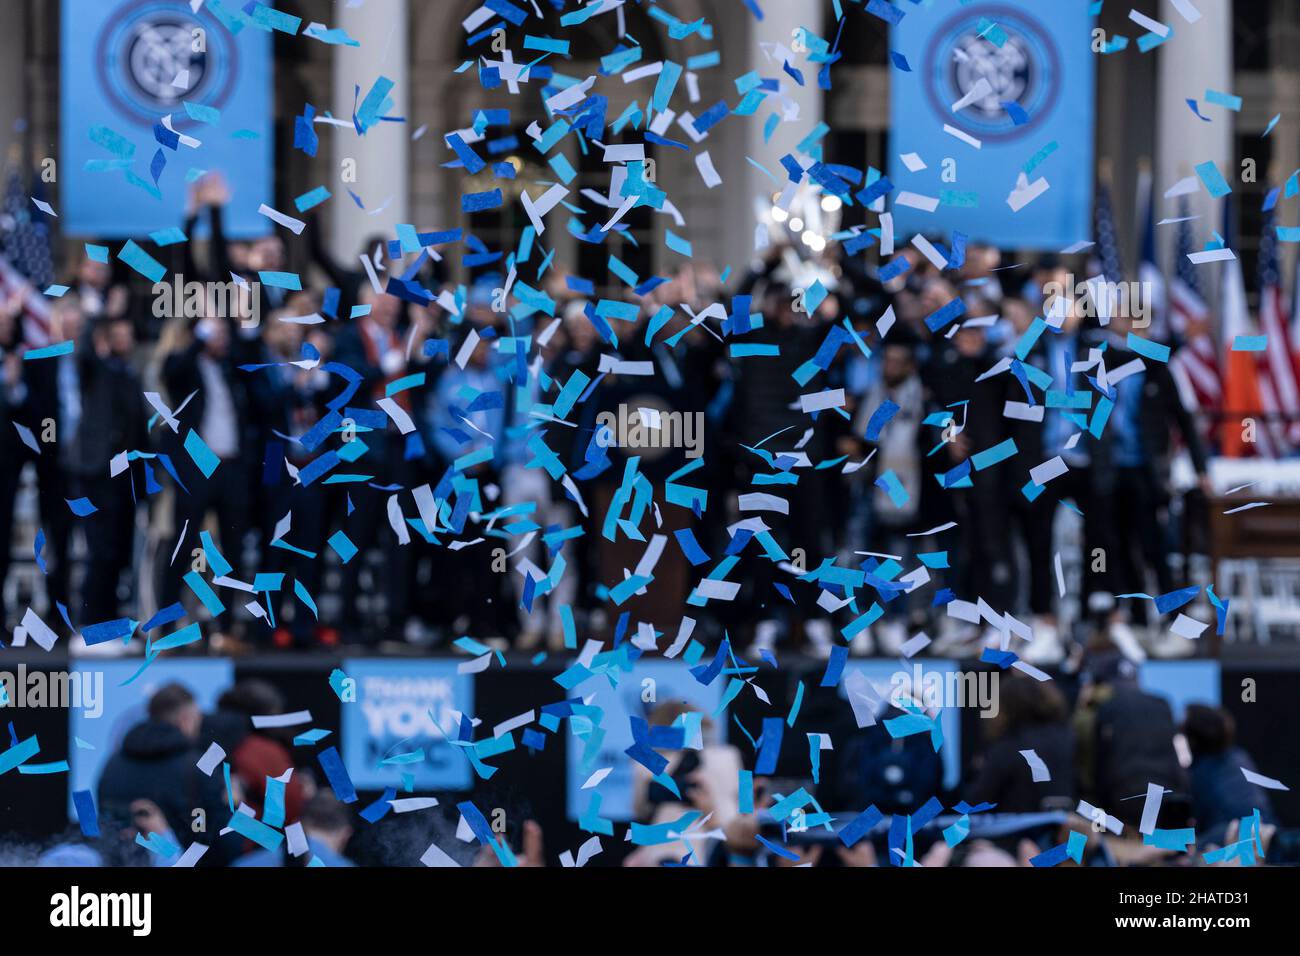 New York, USA. 14th Dec, 2021. Celebration for NYCFC winning the 2021 MLS Cup on City Hall steps in full swing in New York on December 14, 2021. NYCFC finished the regular season in 4th place and played almost all playoff games away. Winning the MLS Cup is the first trophy won by the franchise since it was established 7 years ago. NYCFC is part of the City Football Group which owns football clubs around the world. (Photo by Lev Radin/Sipa USA) Credit: Sipa USA/Alamy Live News Stock Photo